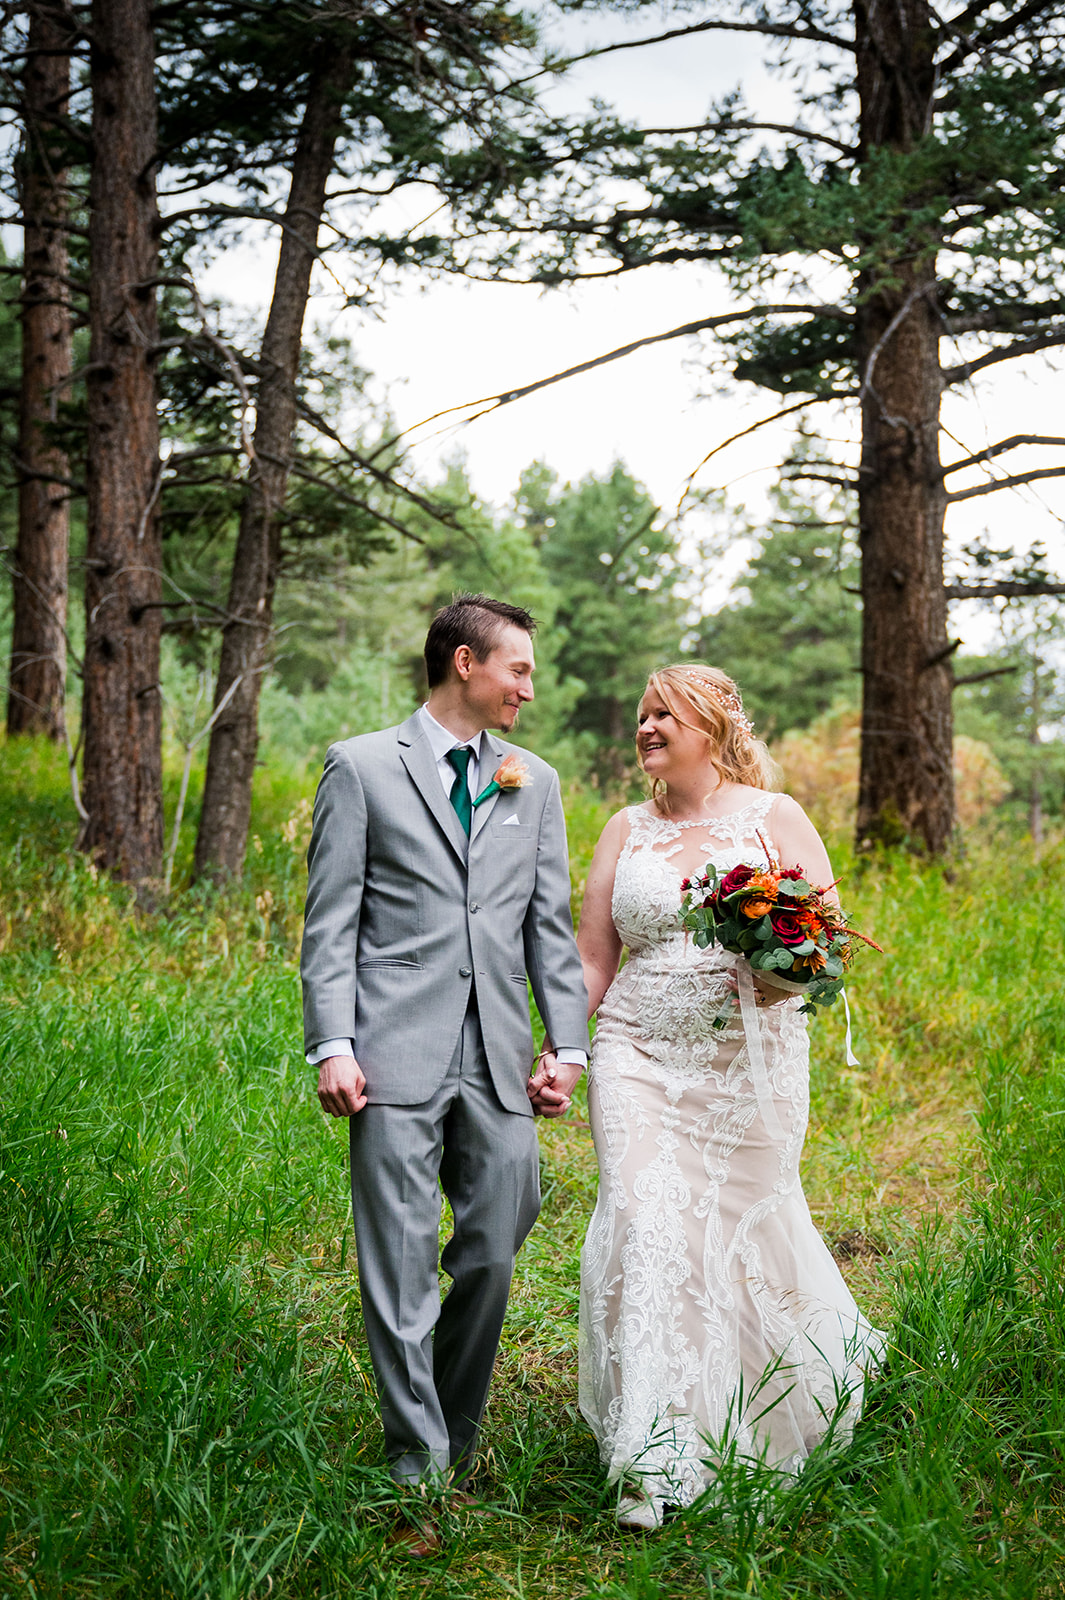 A bride and groom walk casually toward the camera holding hands and smiling at one another.